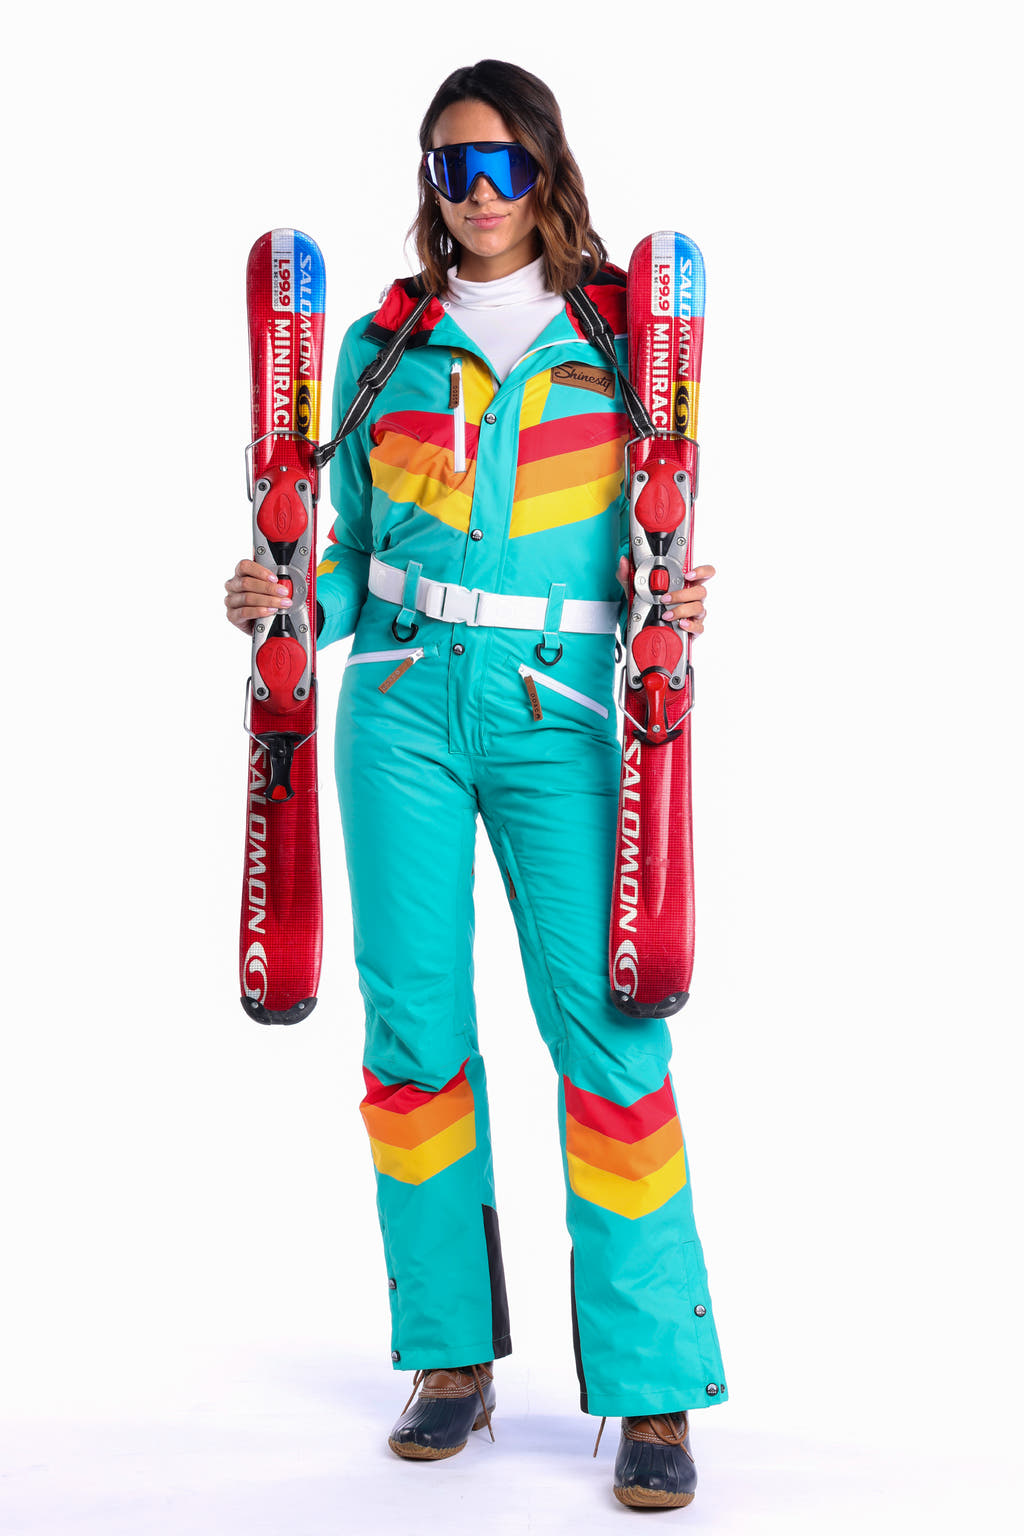 The Side Country Sender Women's Turquoise Striped Retro Ski Suit